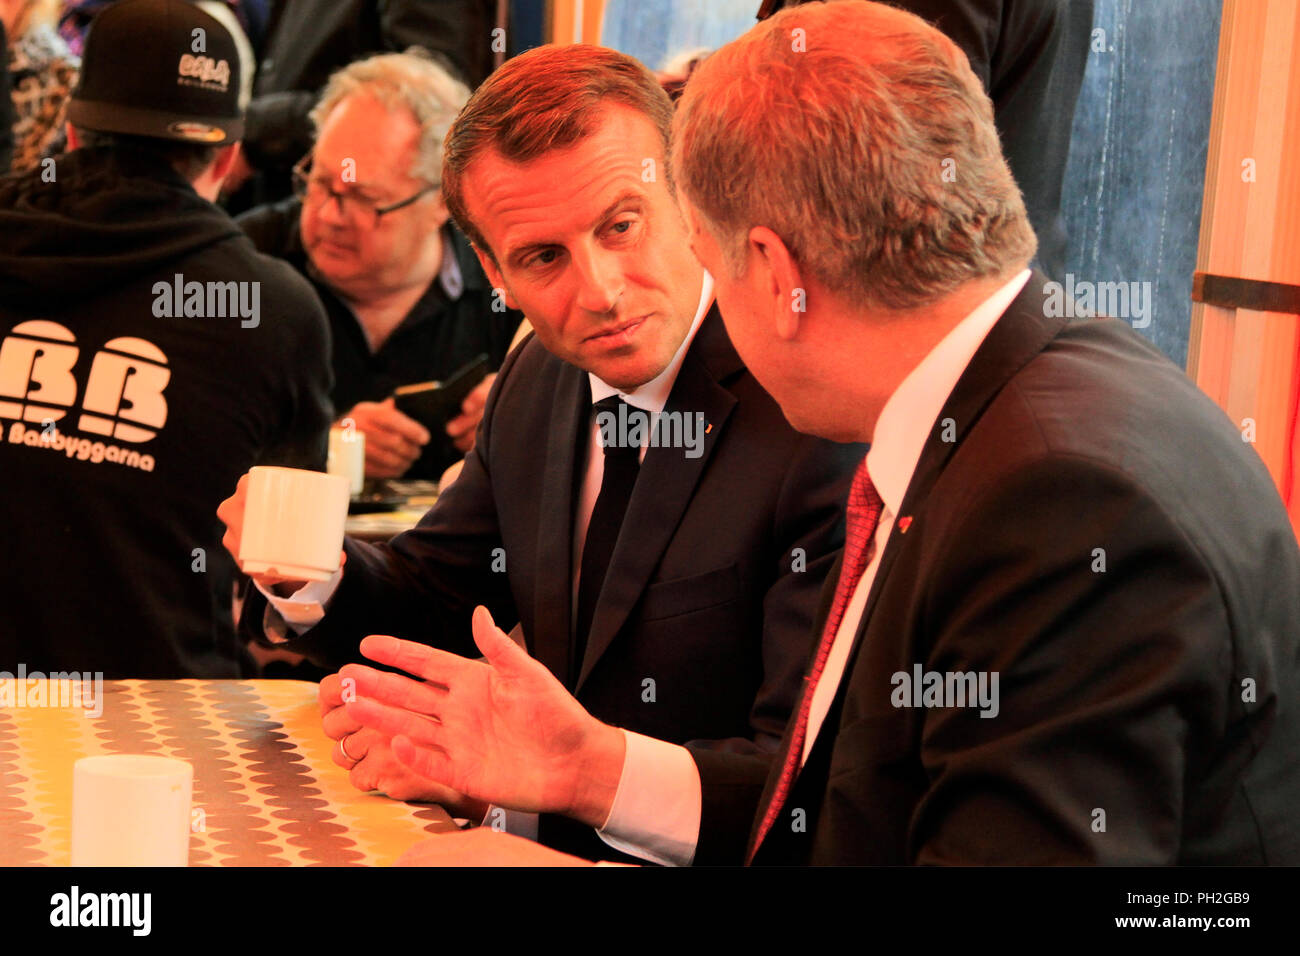 Helsinki, Finland. August 30, 2018. French President Emmanuel Macron (C) and Finnish President Sauli Niinistö (C-R) have a cup of coffee at a small Market Square cafeteria after their joint press conference. Credit: Taina Sohlman/Alamy Live News Stock Photo